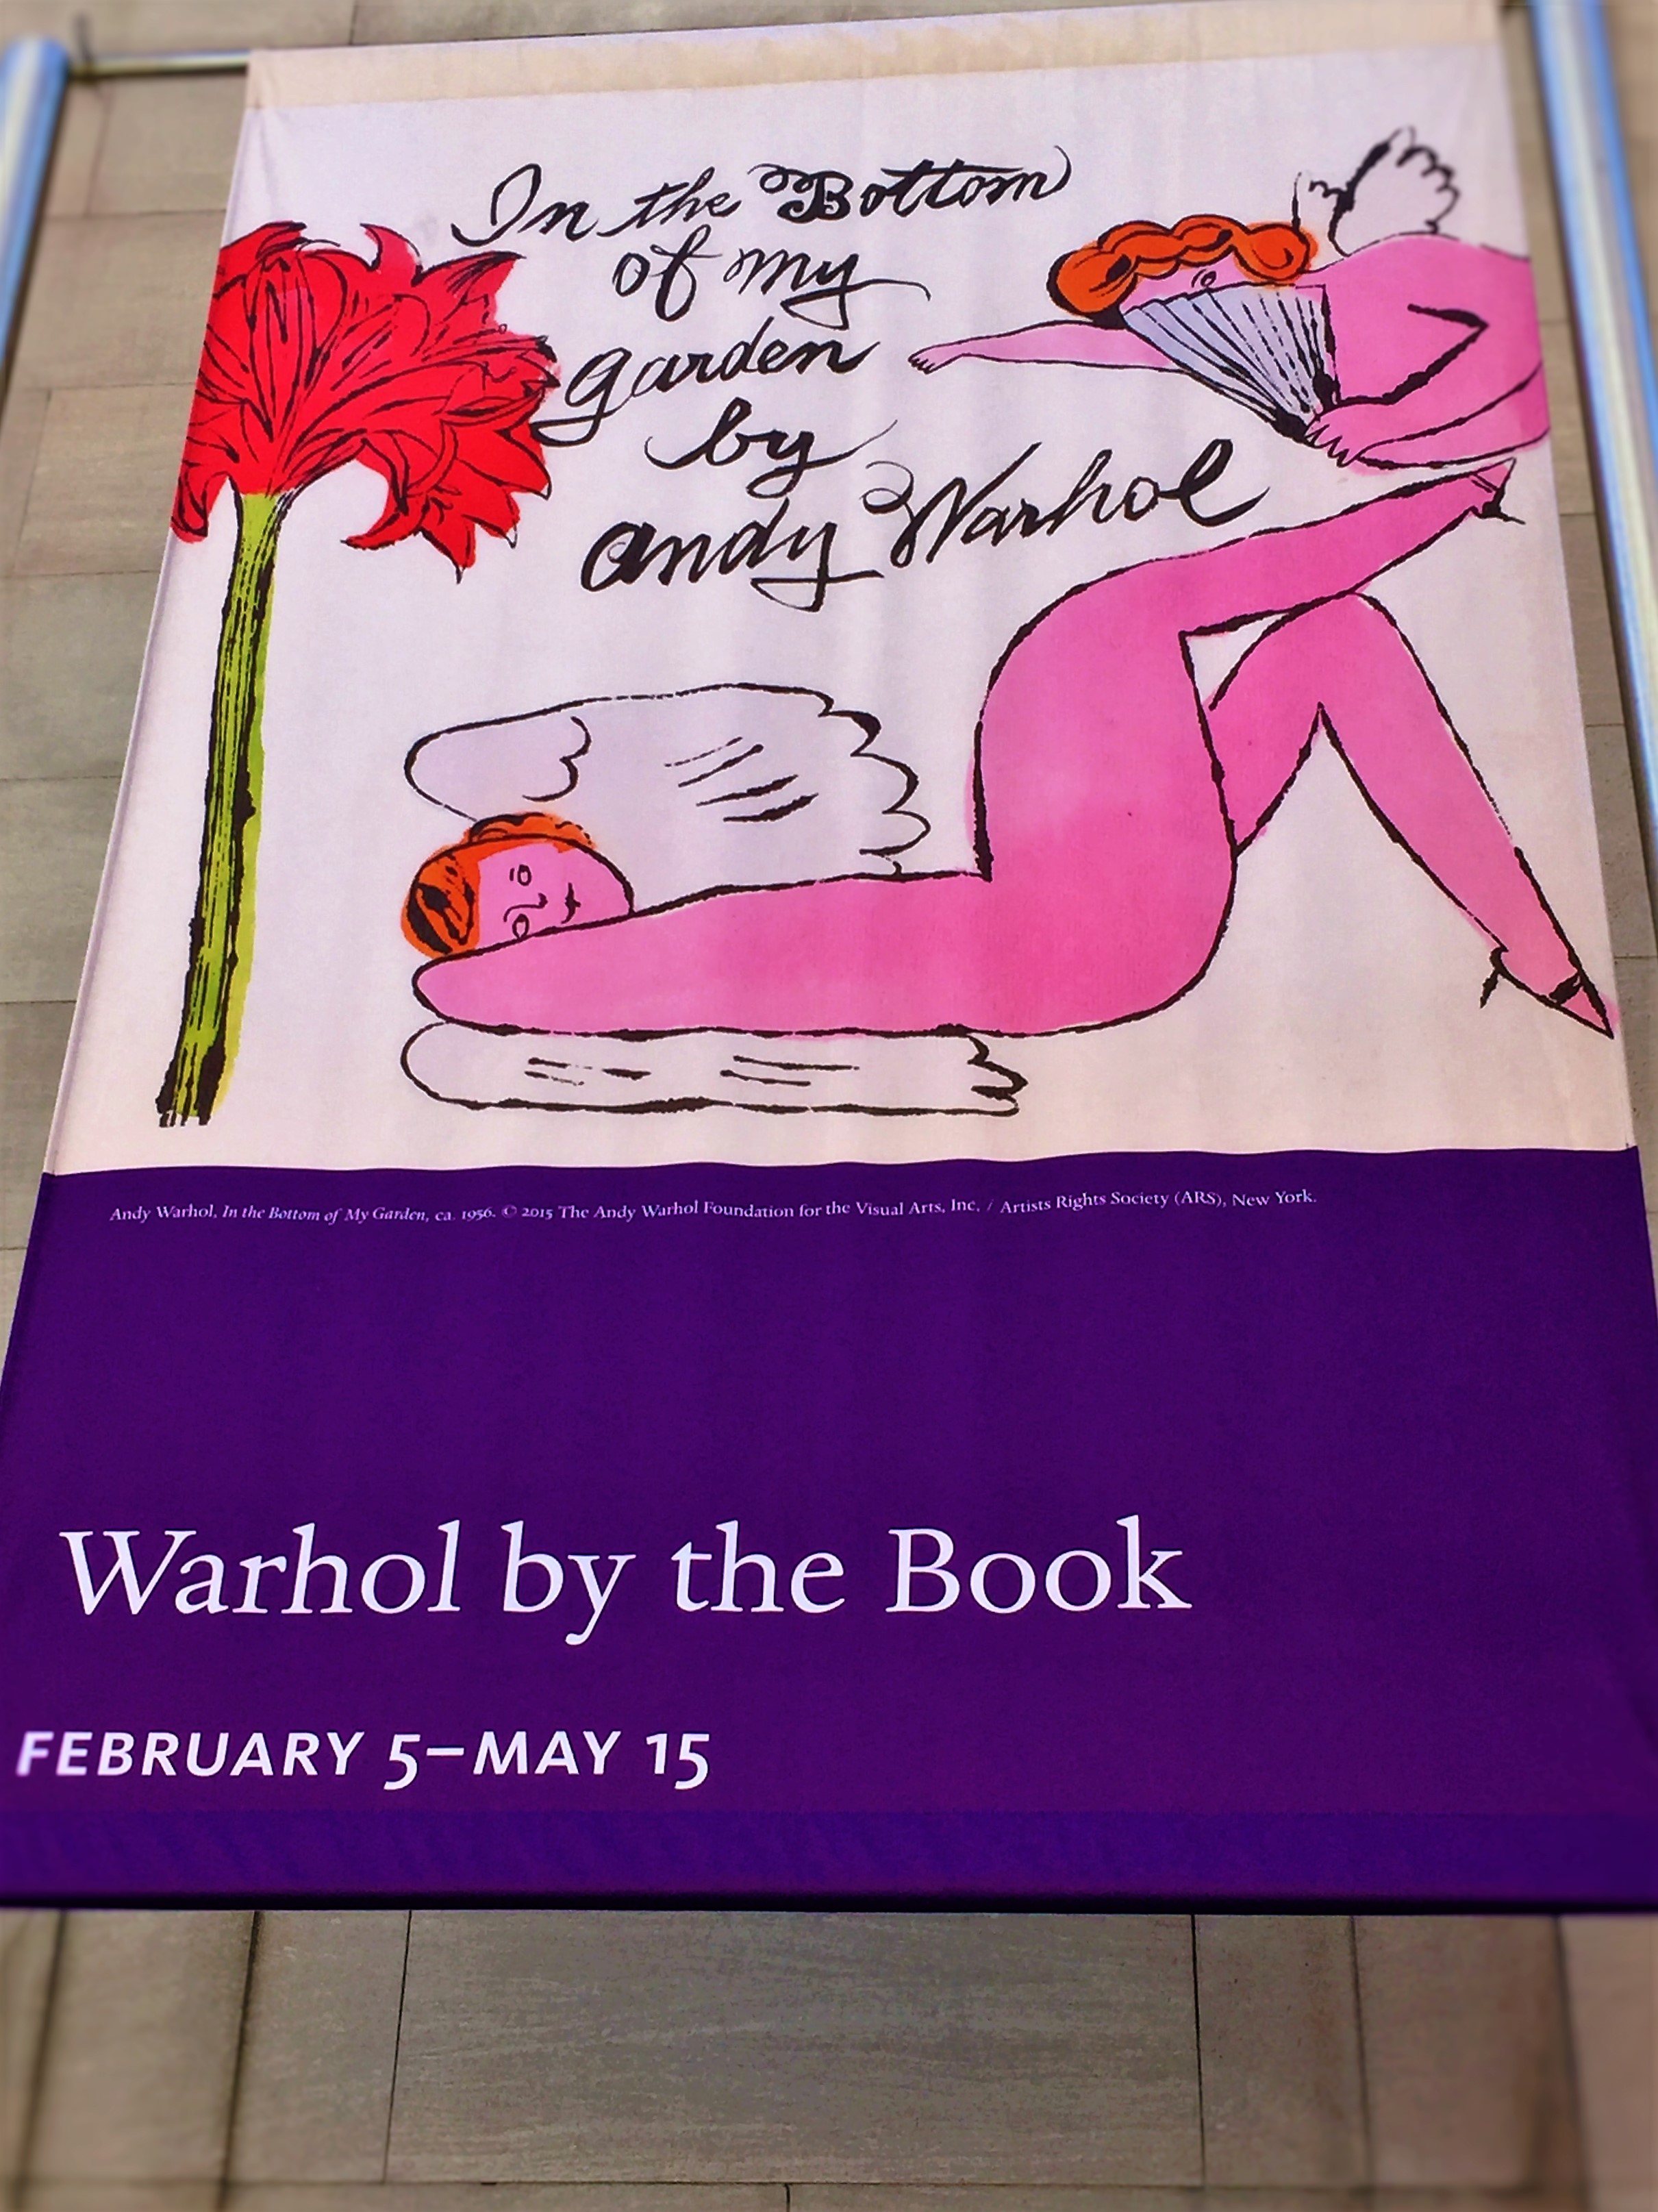 Book jackets, kiddie books, starving artists, oh my! A visit to the Warhol exhibit at the Morgan Library in New York City. Photo credit: M. Ciavardini